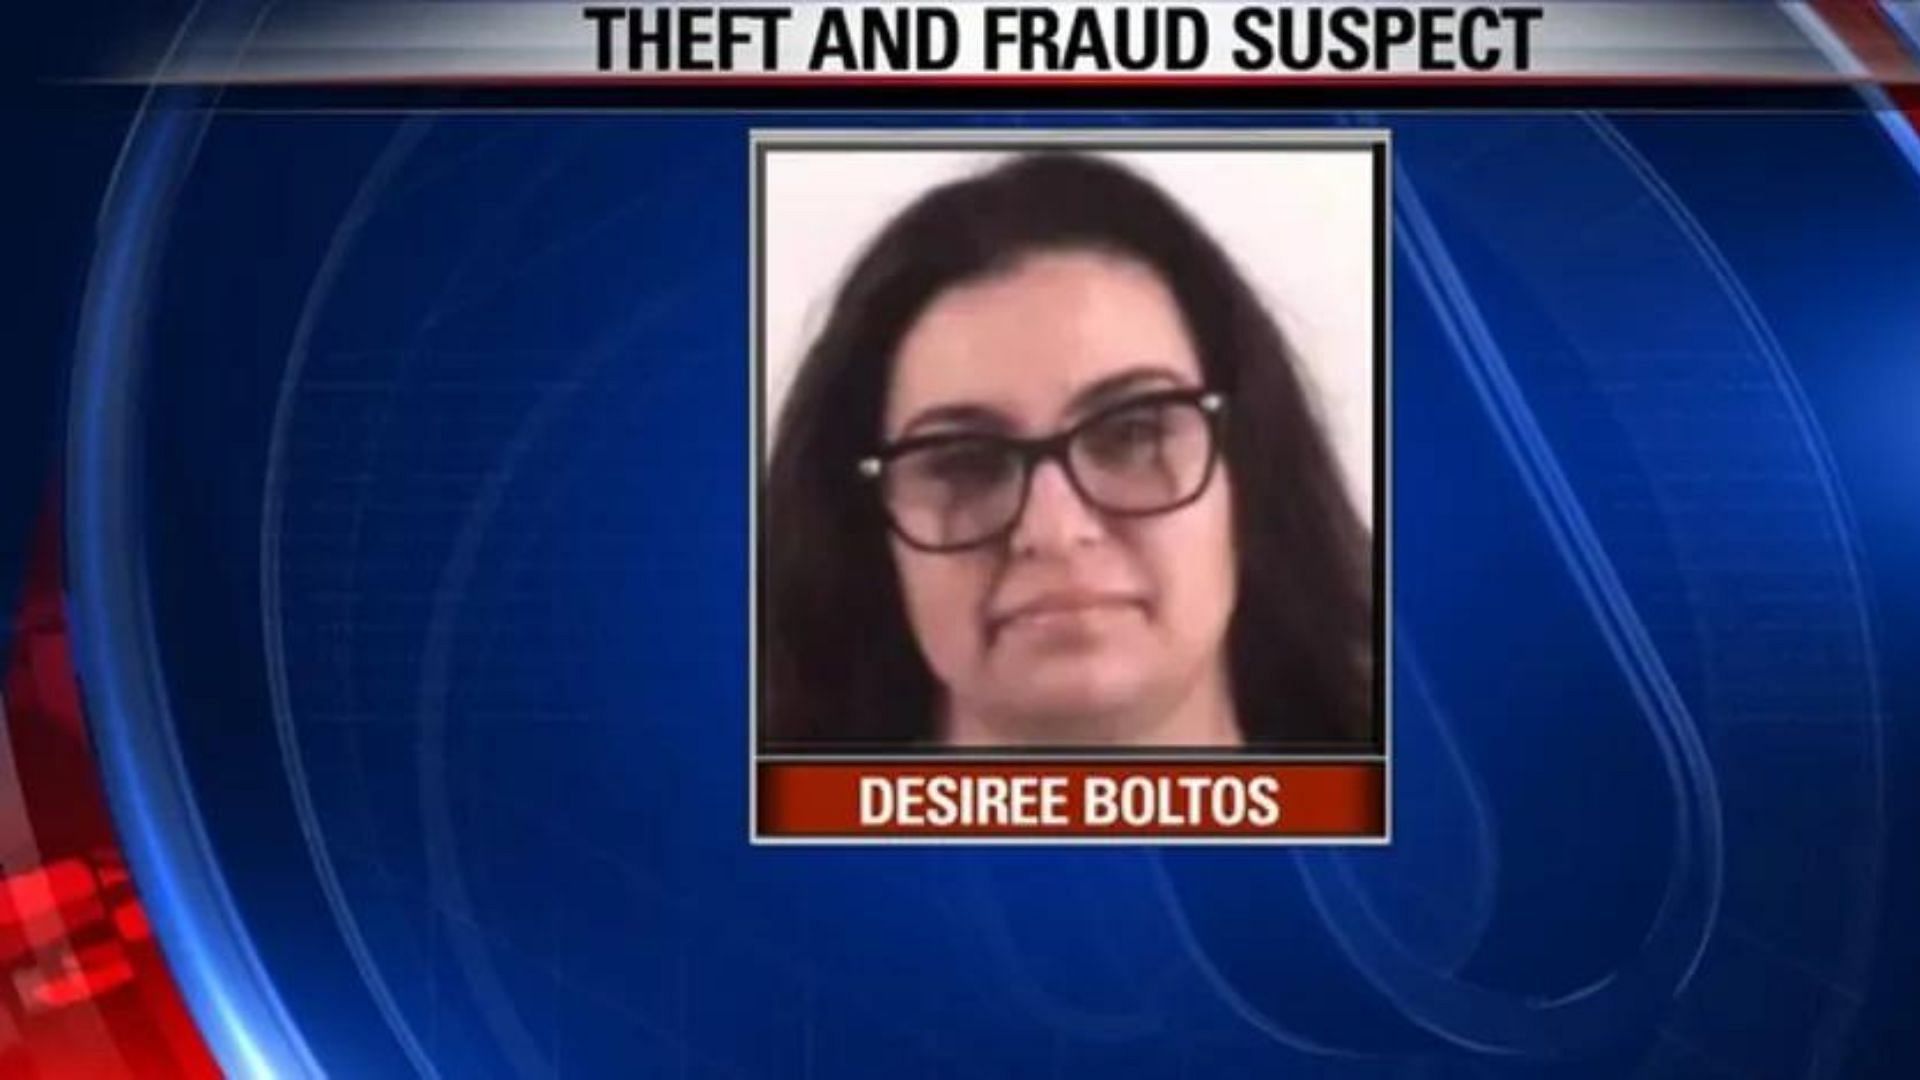 Desiree Boltos was alleged to have been involved in a sweetheart swindler scam (Image via FOX 32 Chicago)